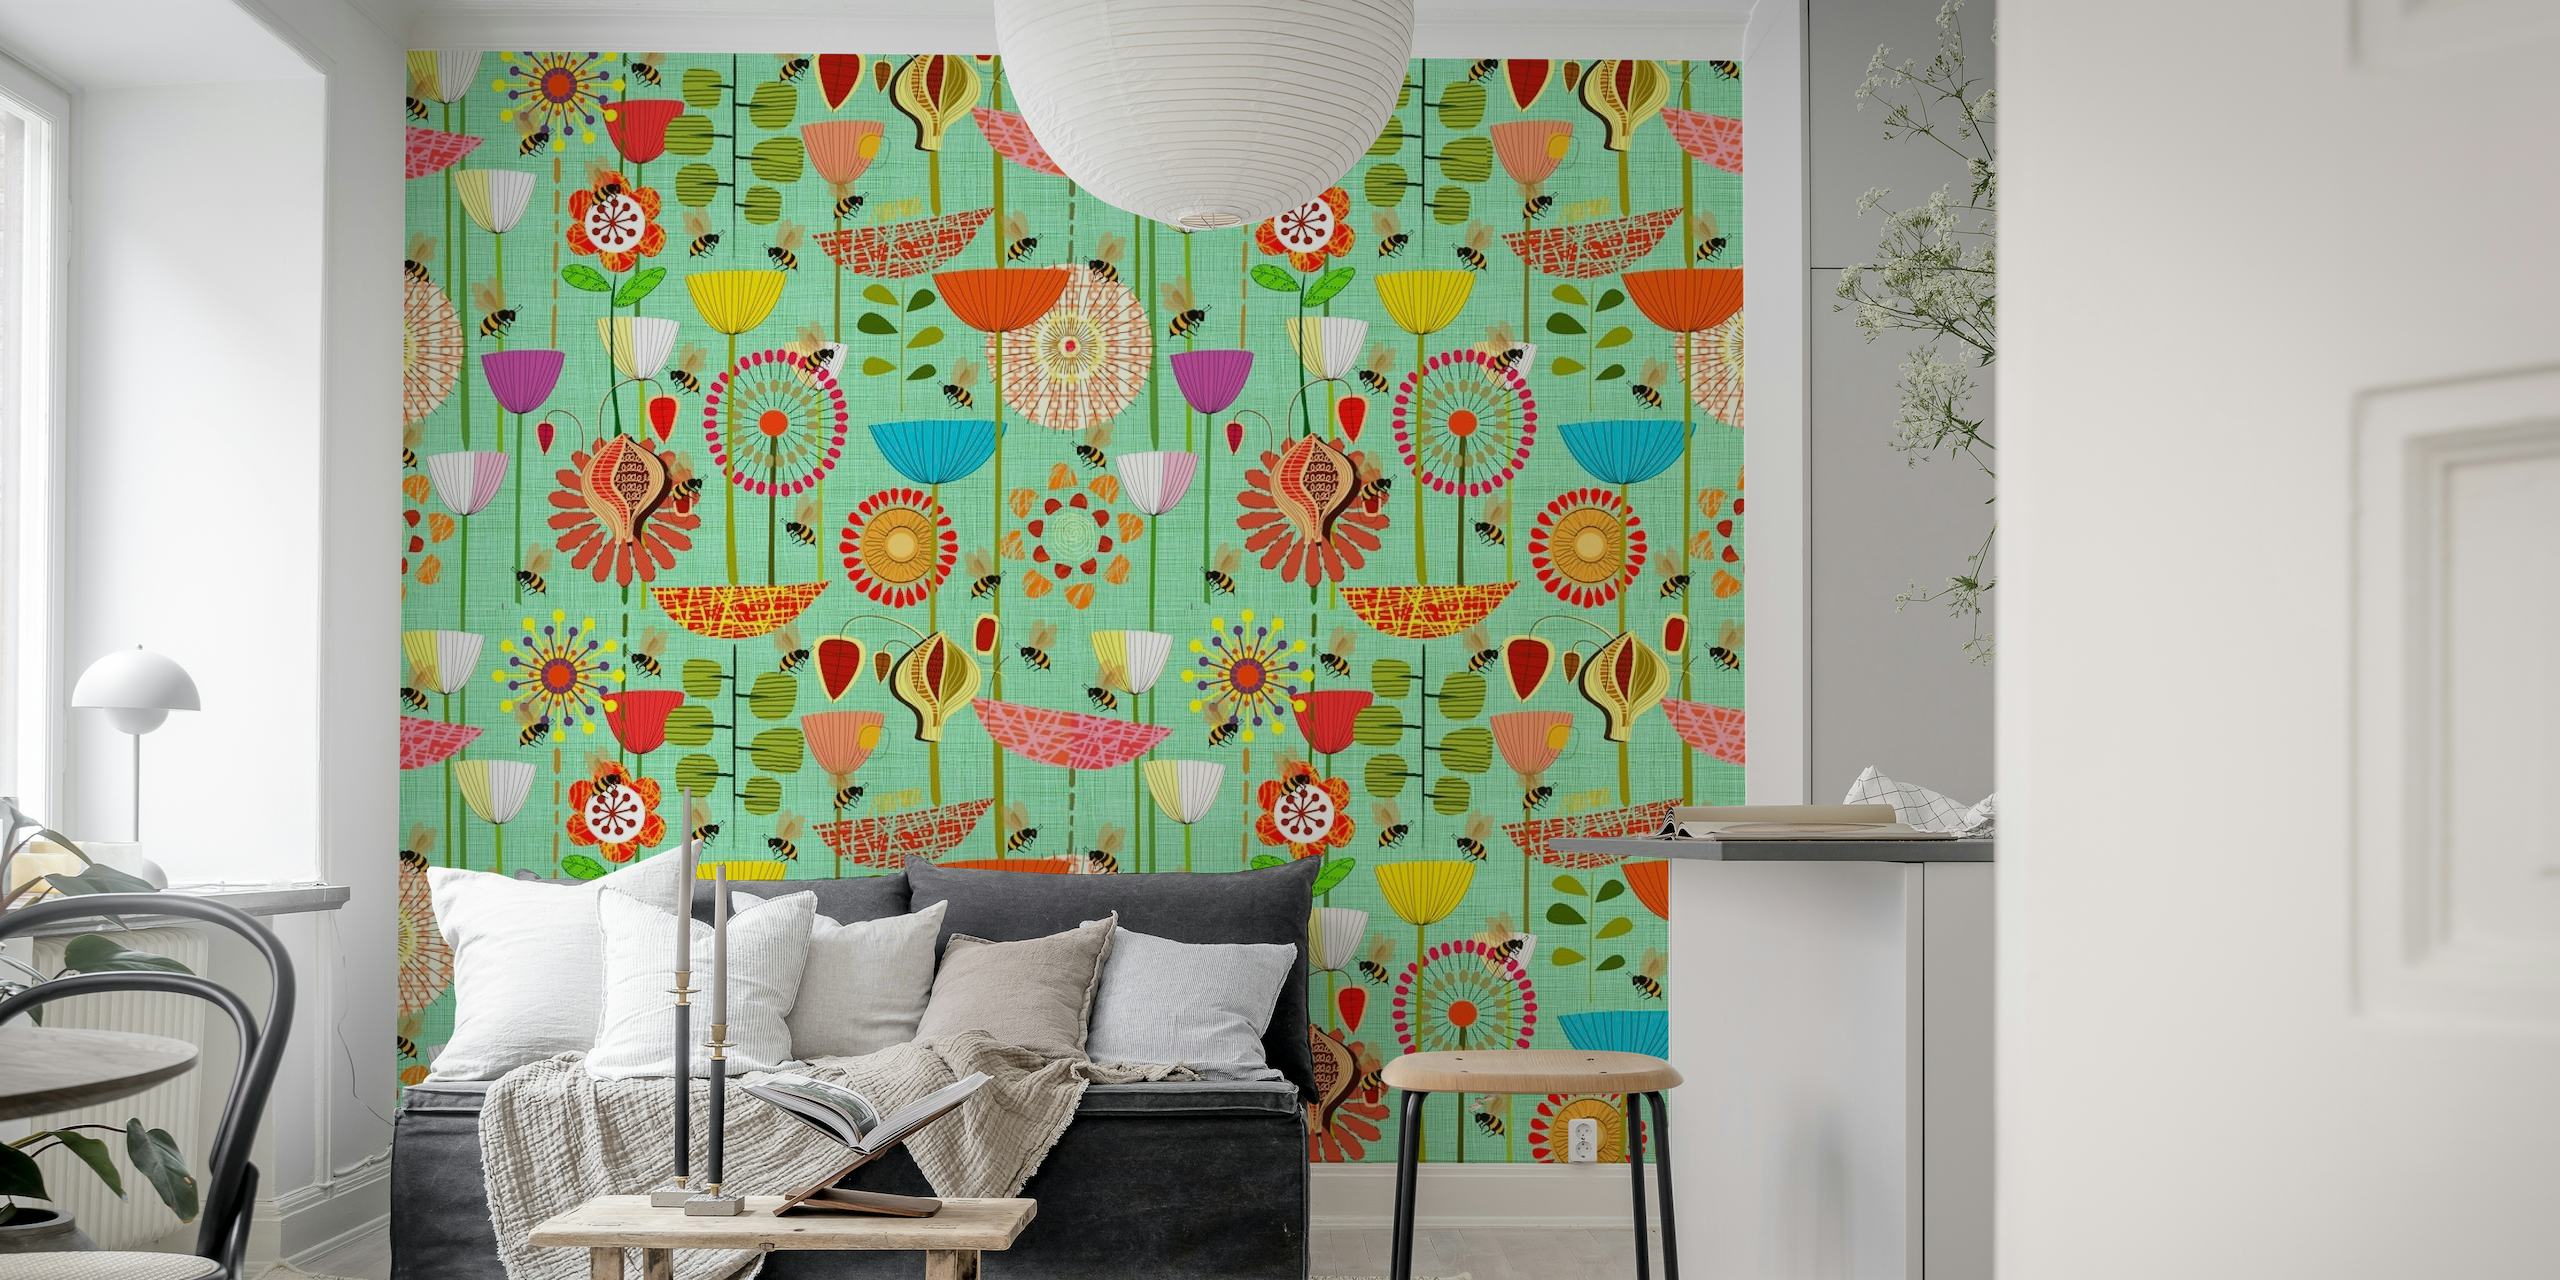 Mid-century modern 'Where the Bees Fly' bee-themed wallpaper